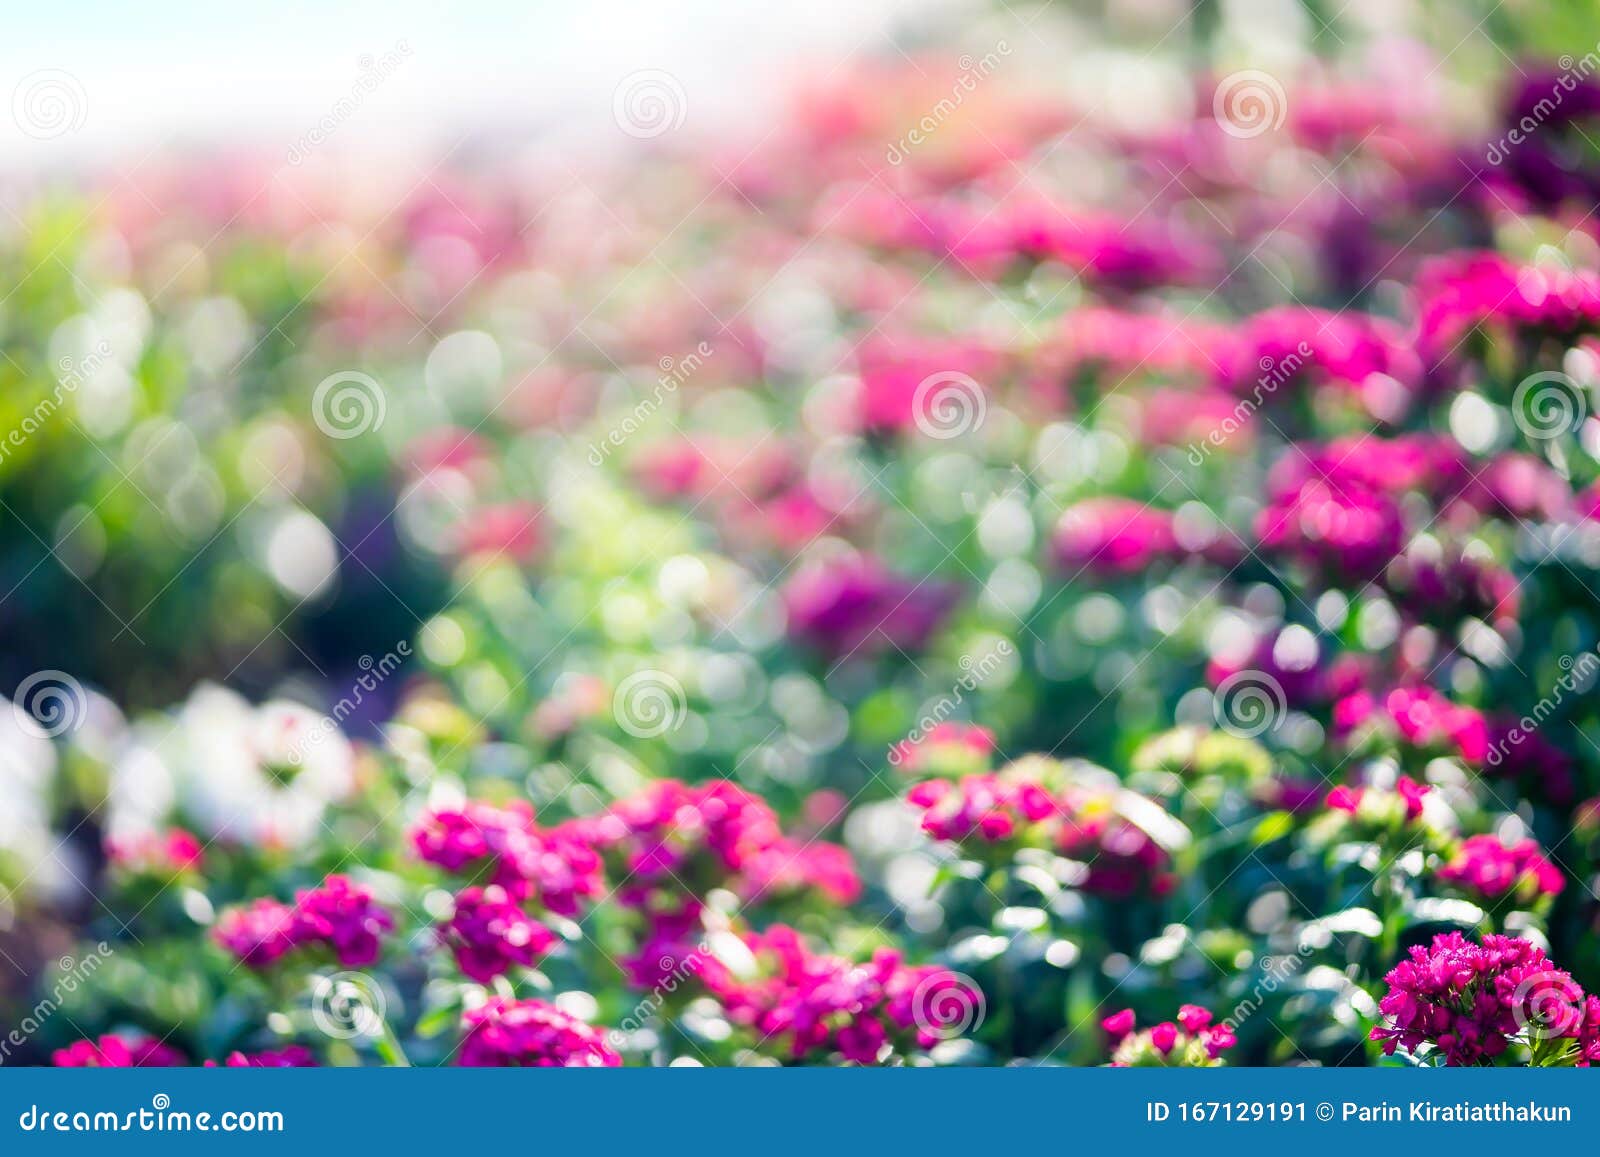 Colorful Blur Flowers in Garden Background Stock Image - Image of bokeh,  floral: 167129191